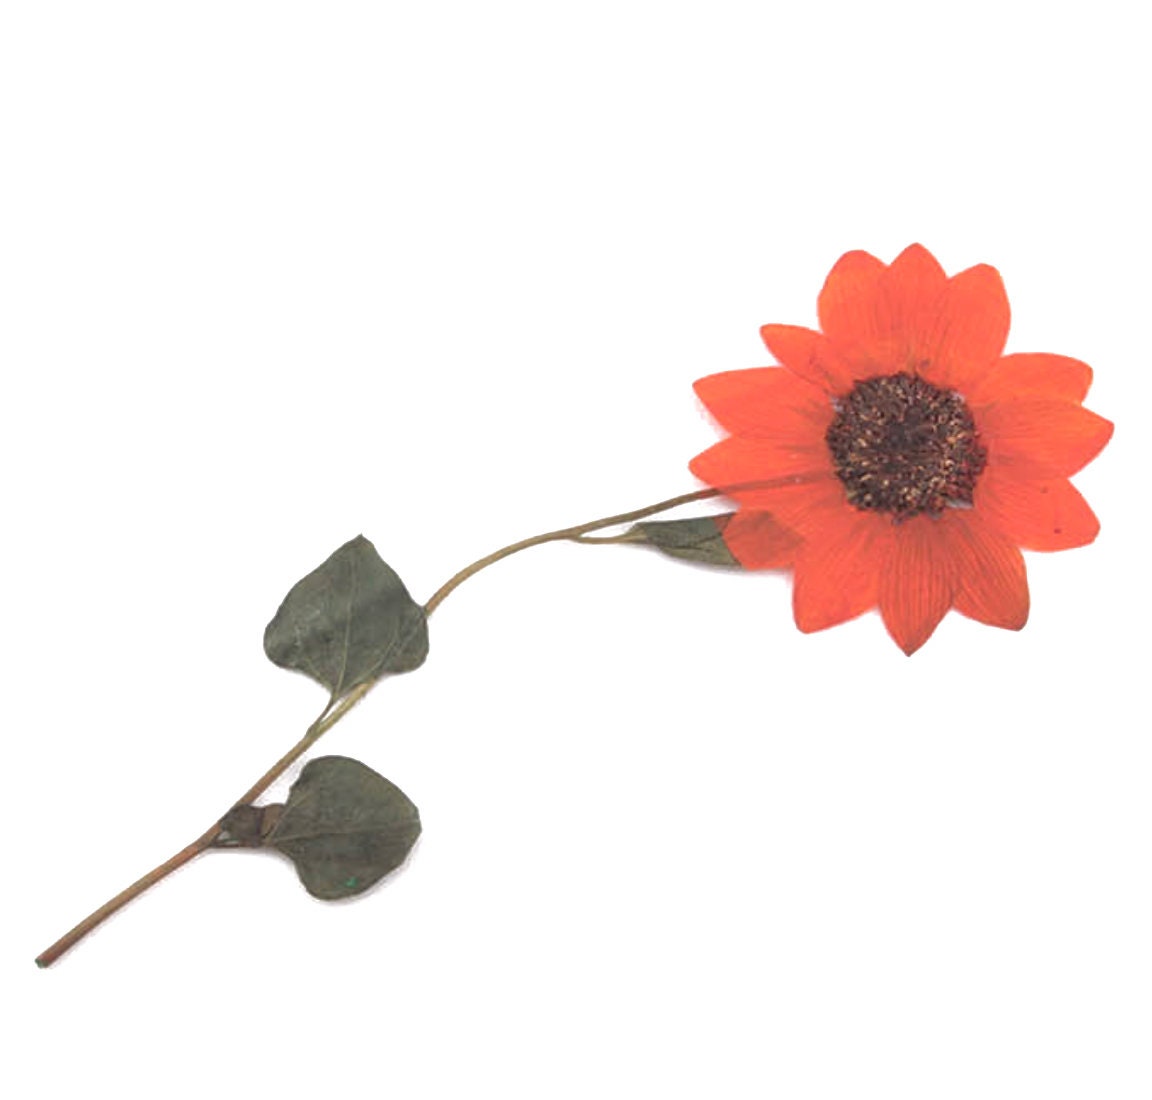 12 X Orange Pressed Dried Daisy Flowers, Resin Art, Scrapbooking, Card  Making, Resin Supplies, Craft Flowers, Colourful Flowers 